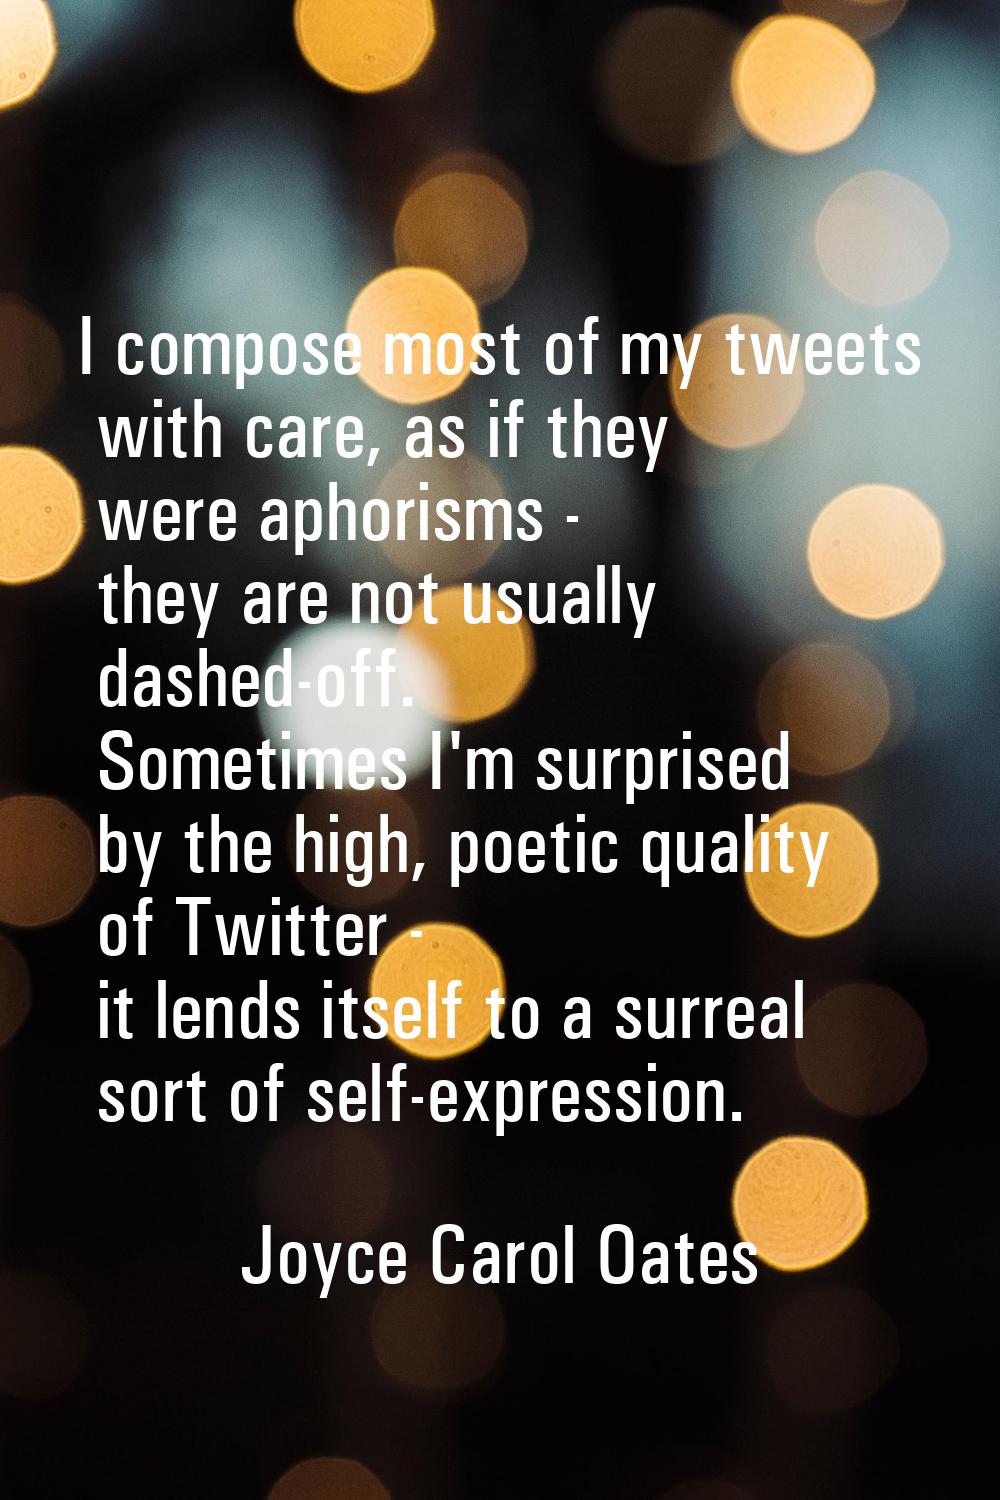 I compose most of my tweets with care, as if they were aphorisms - they are not usually dashed-off.